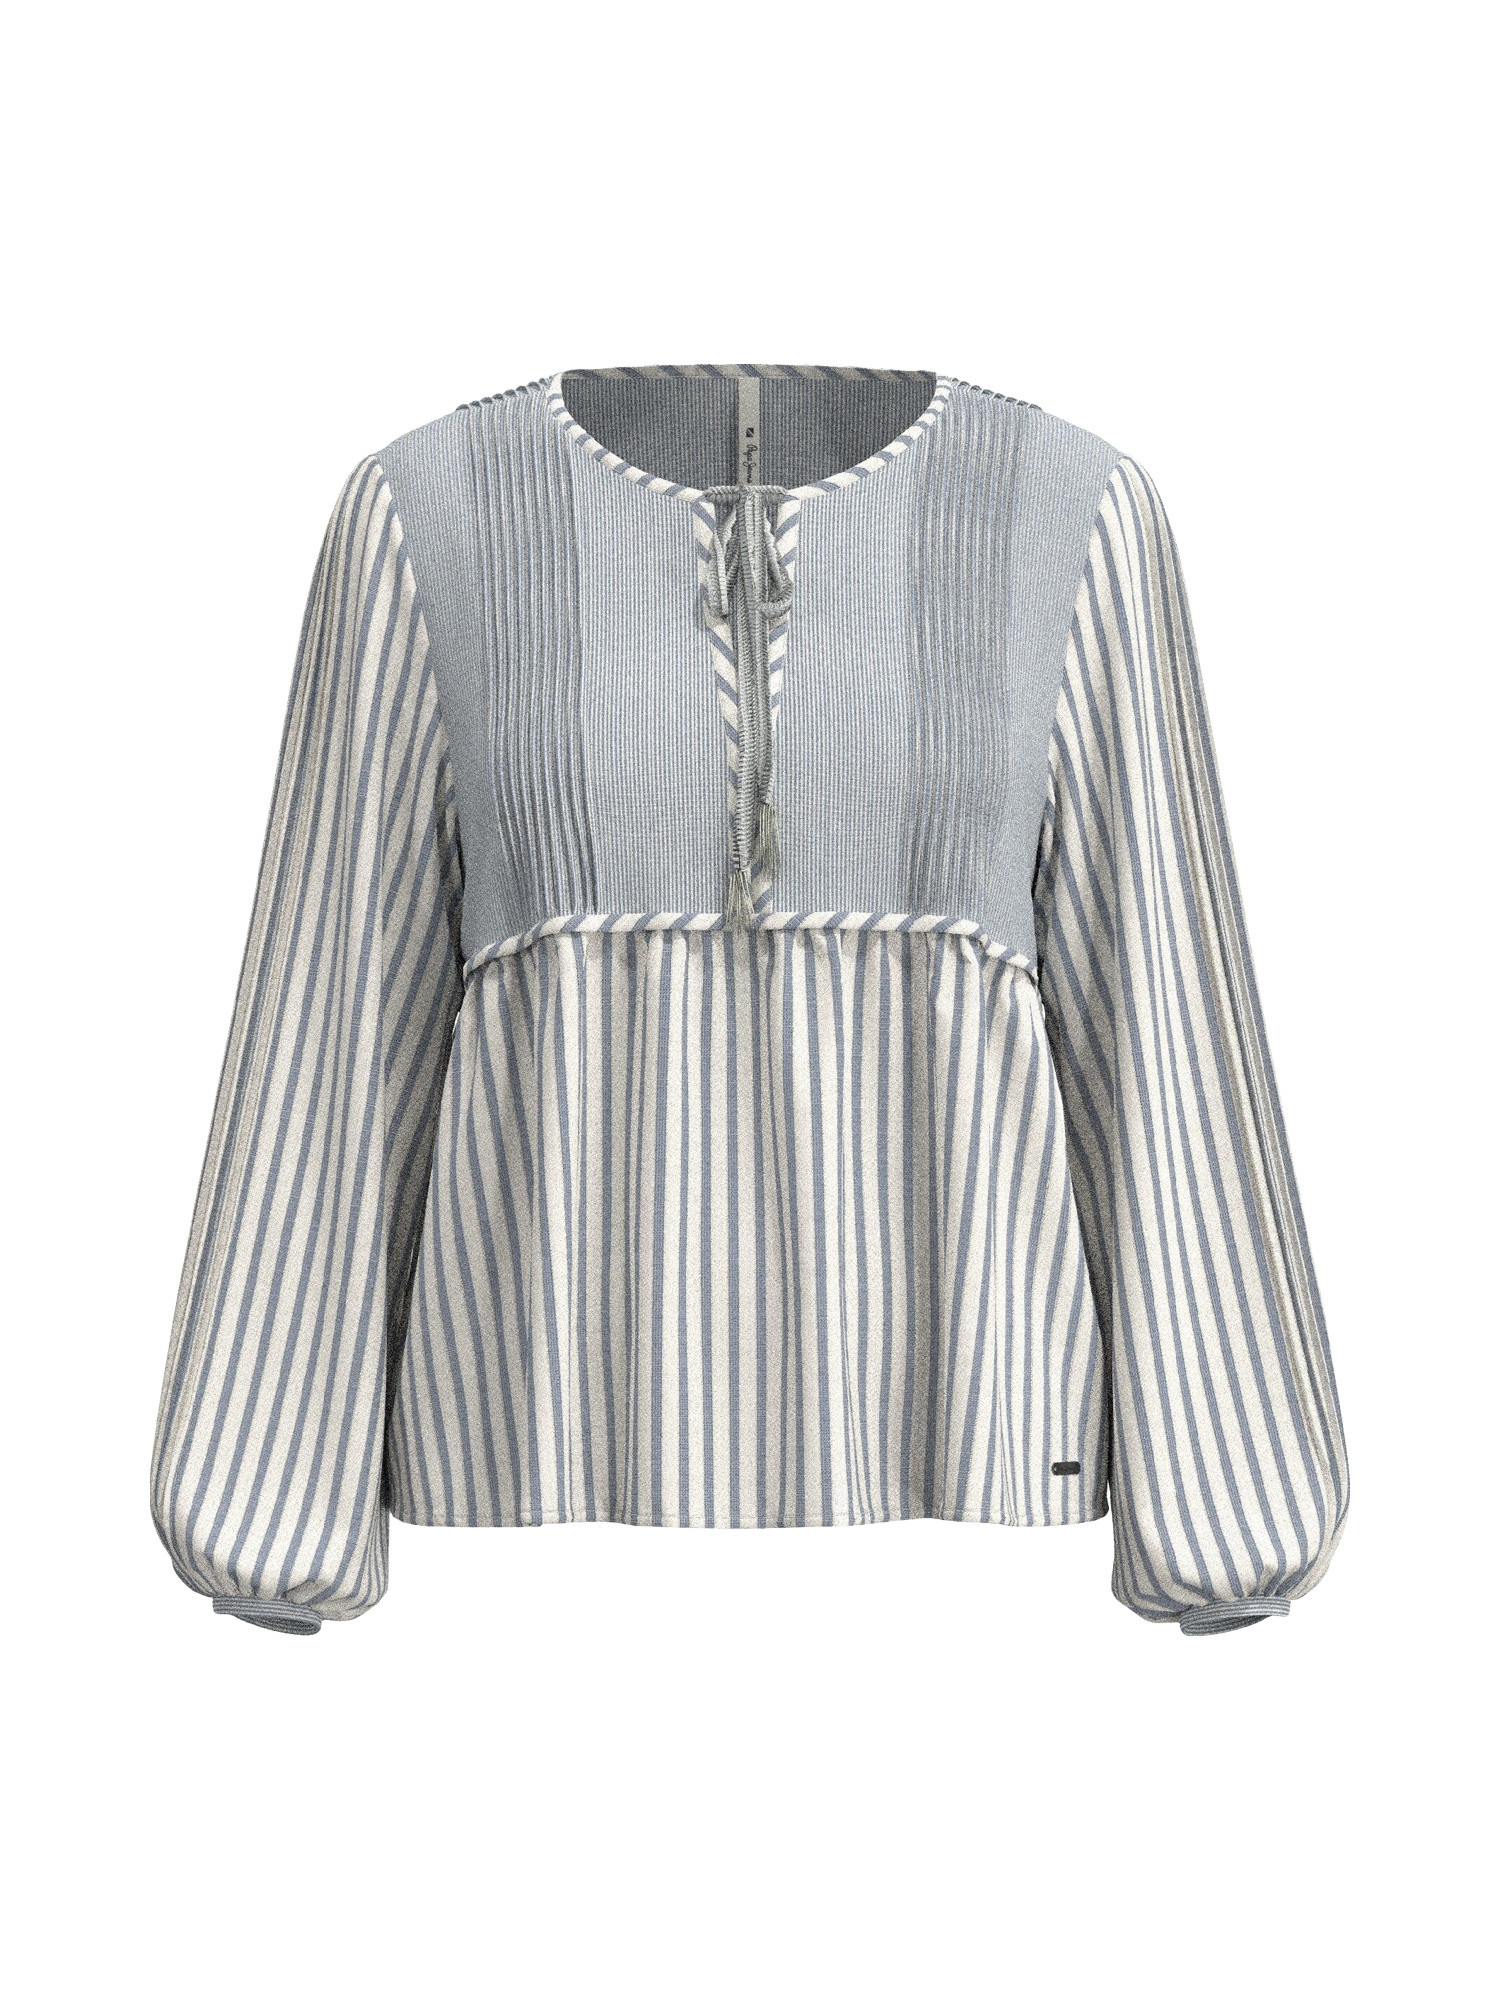 Pepe Jeans - Striped blouse, Light Blue, large image number 0